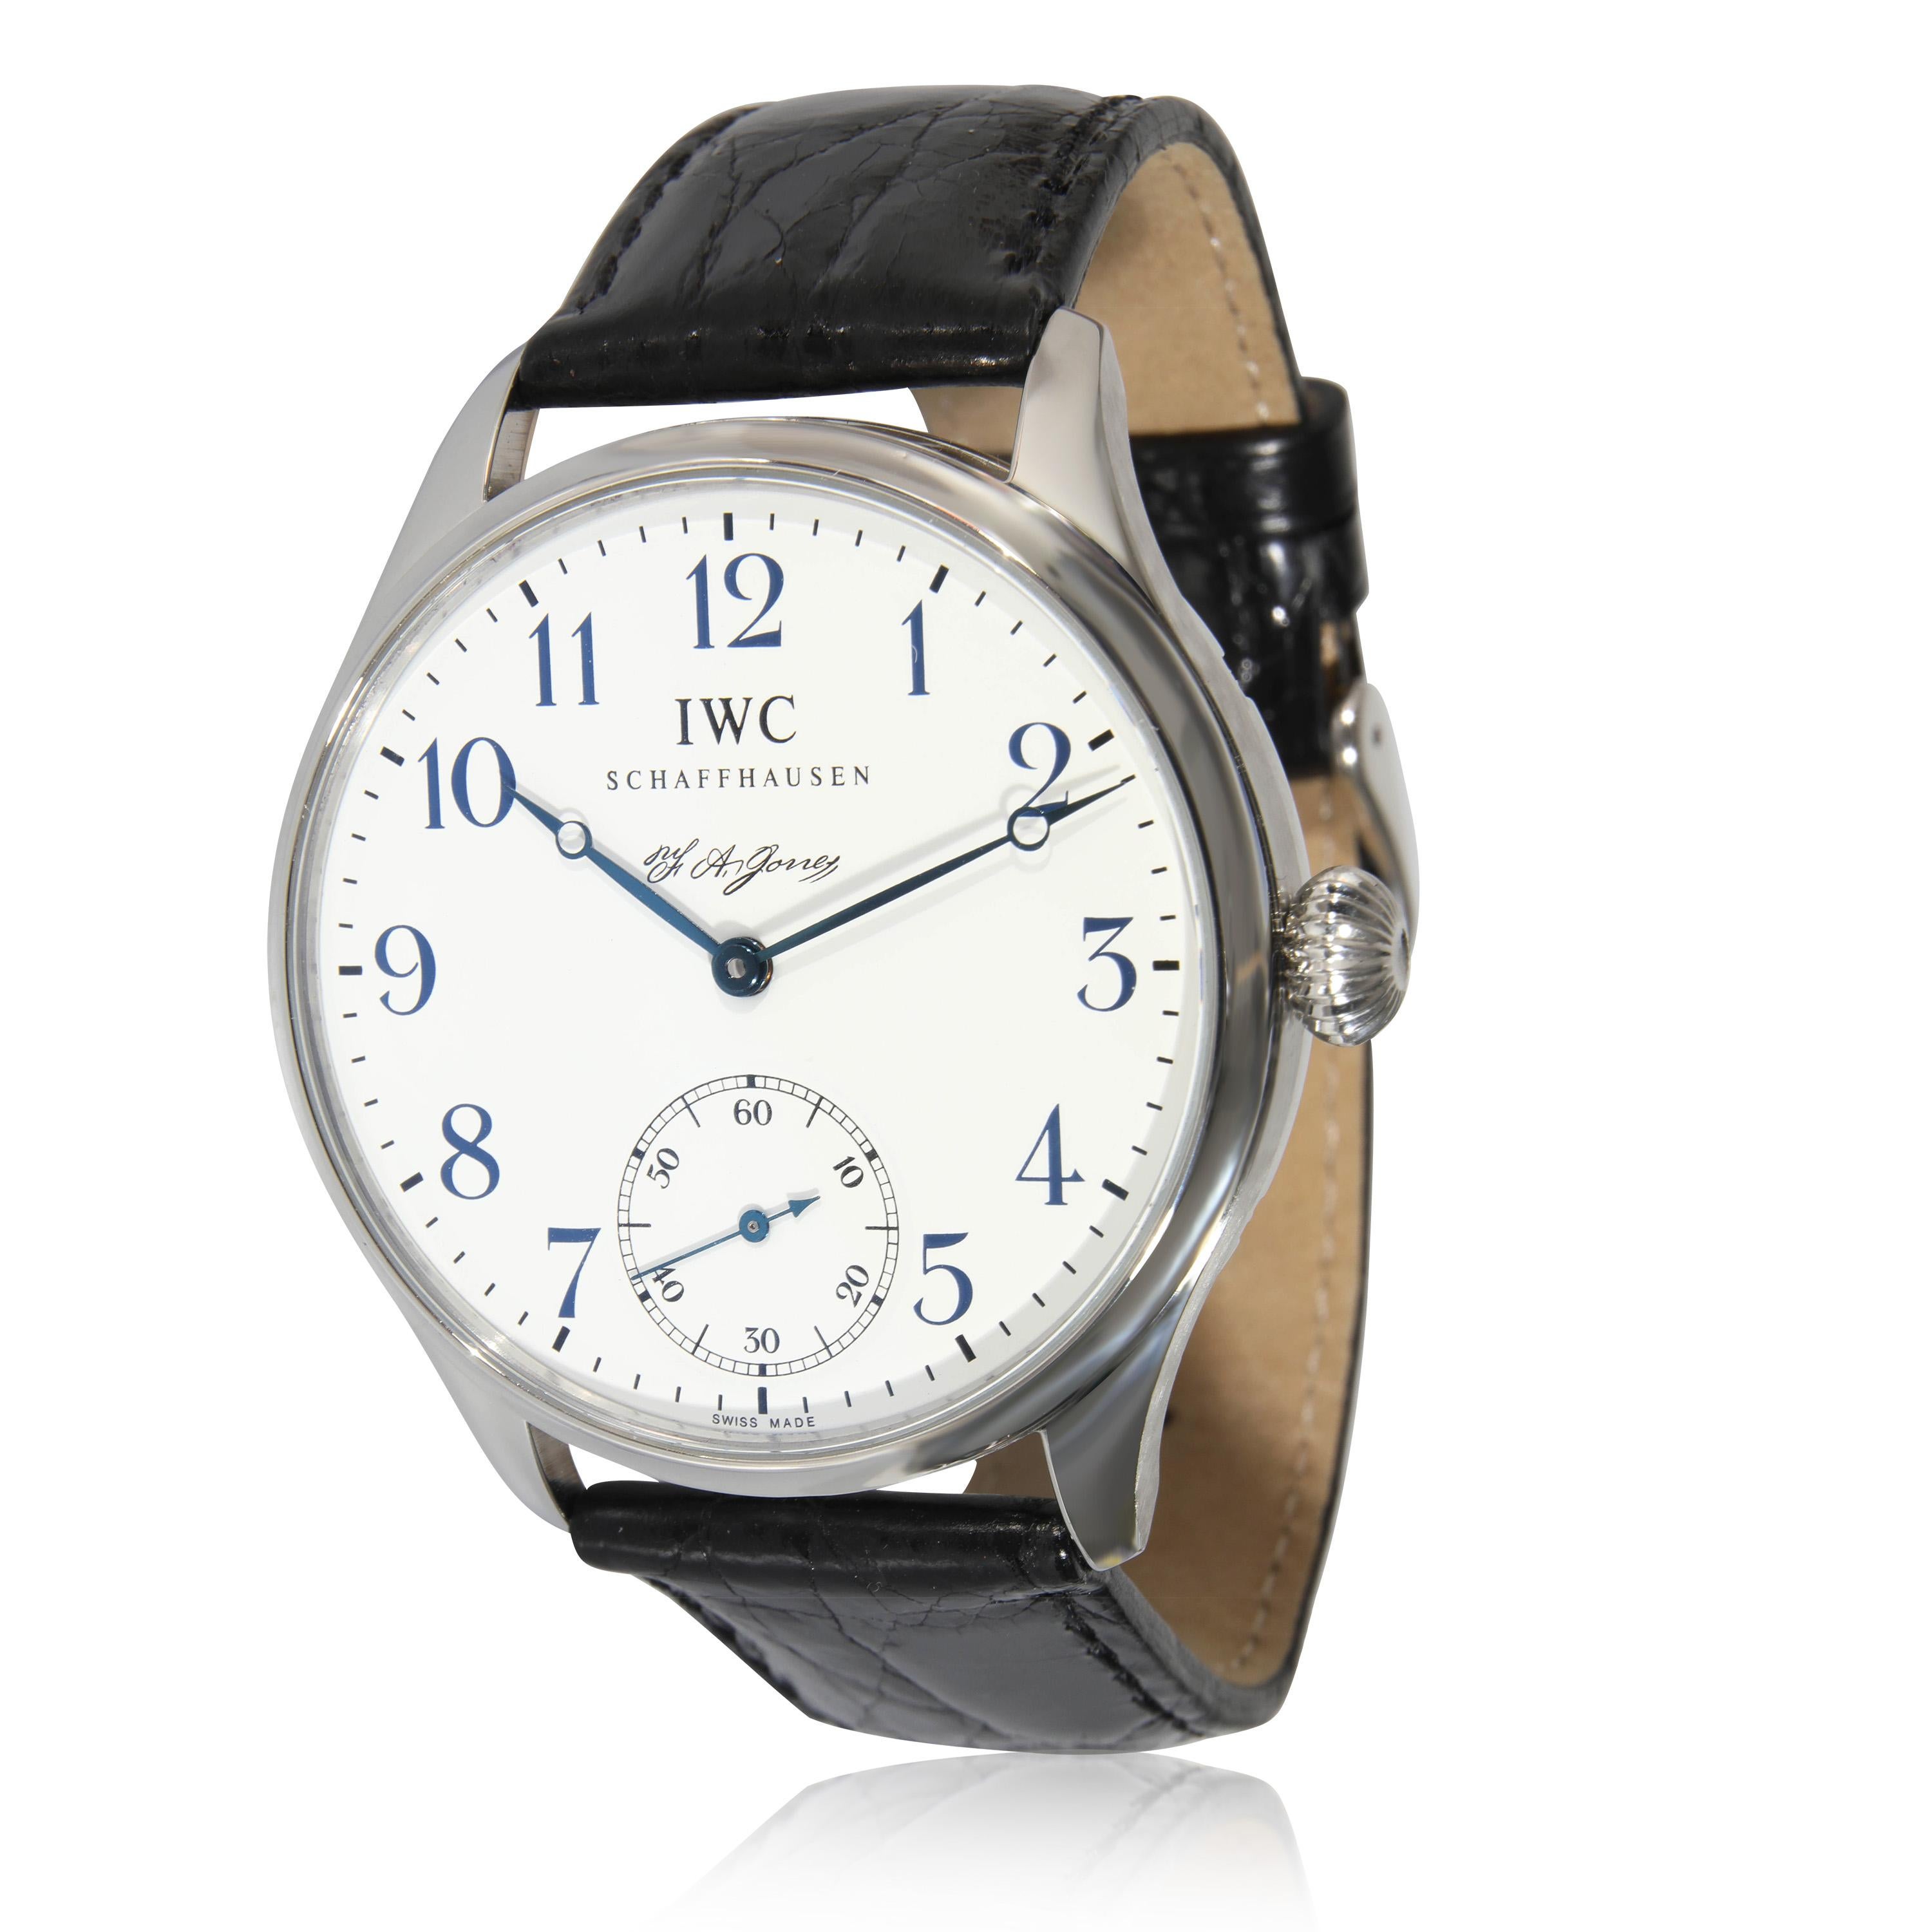 IWC Portugieser F.A.Jones IW544203 Men's Watch in  Stainless Steel

SKU: 130941

PRIMARY DETAILS
Brand: IWC
Model: Portugieser F.A.Jones
Country of Origin: Switzerland
Movement Type: Mechanical: Hand-winding
Year Manufactured: 2005
Year of